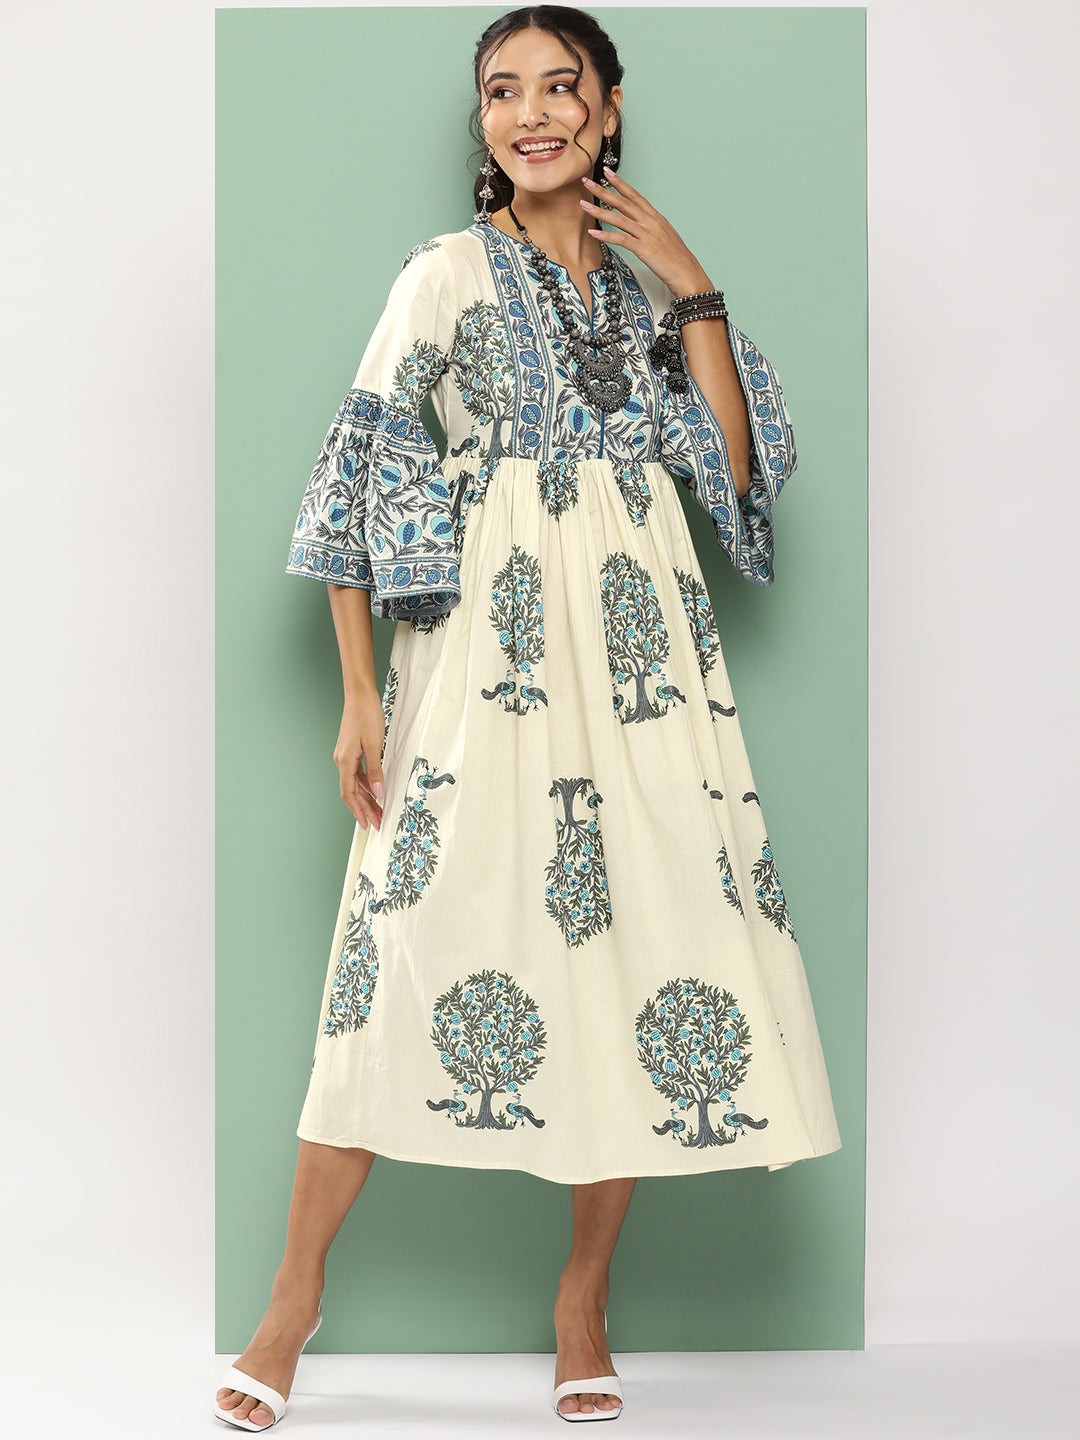 Women's Off-White Printed Long Dress With Waist Belt - Bhama Couture